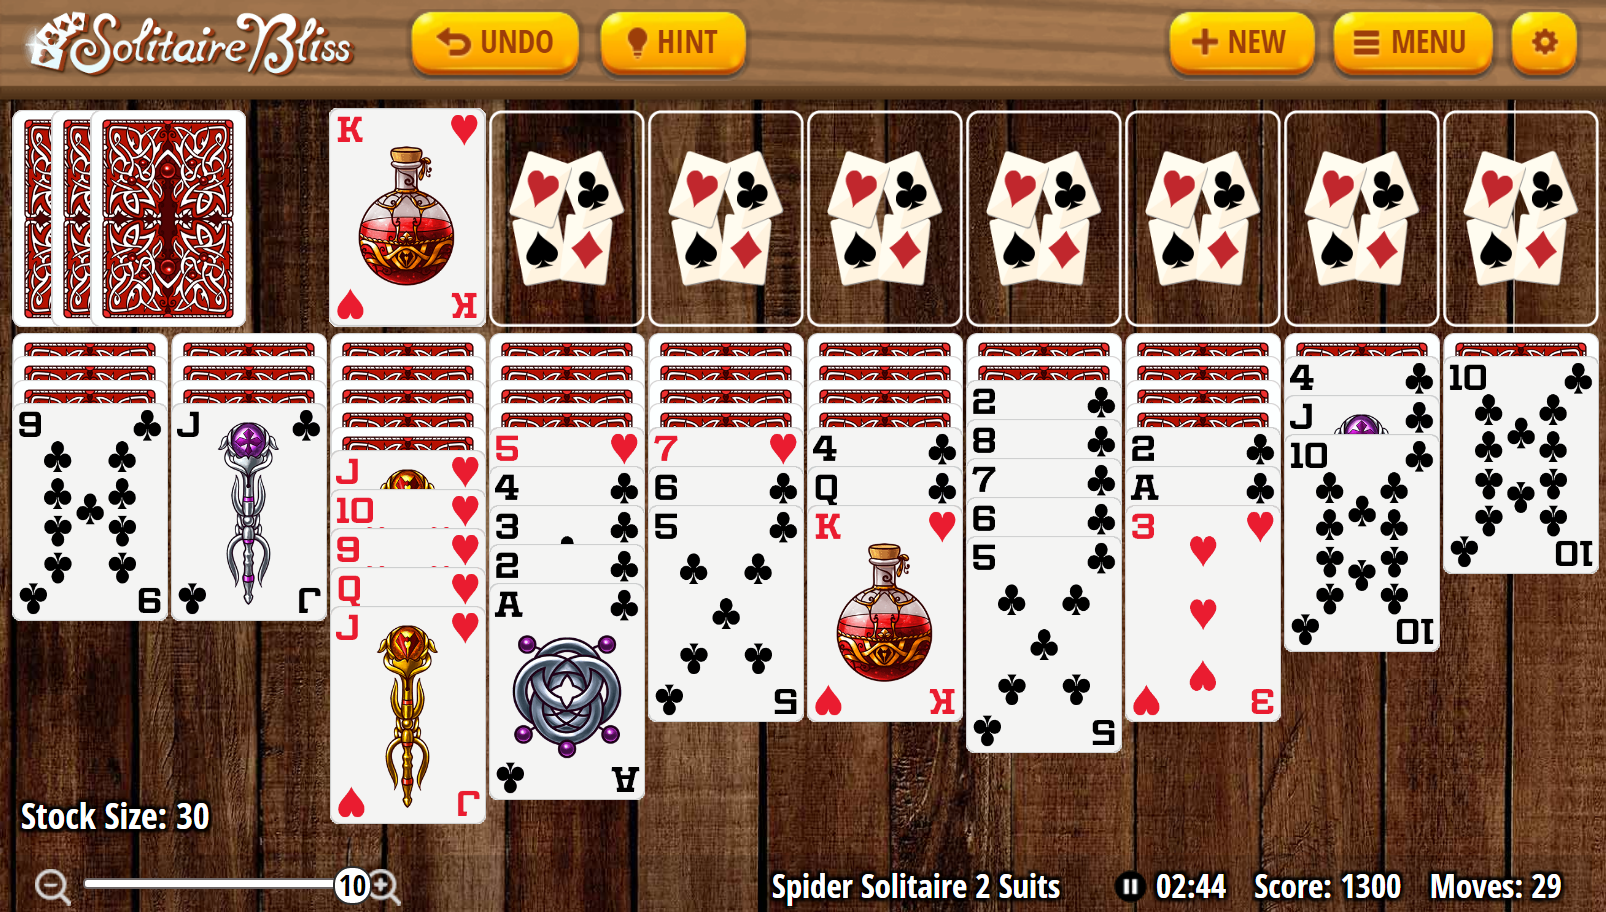 2 suit spider solitaire download free